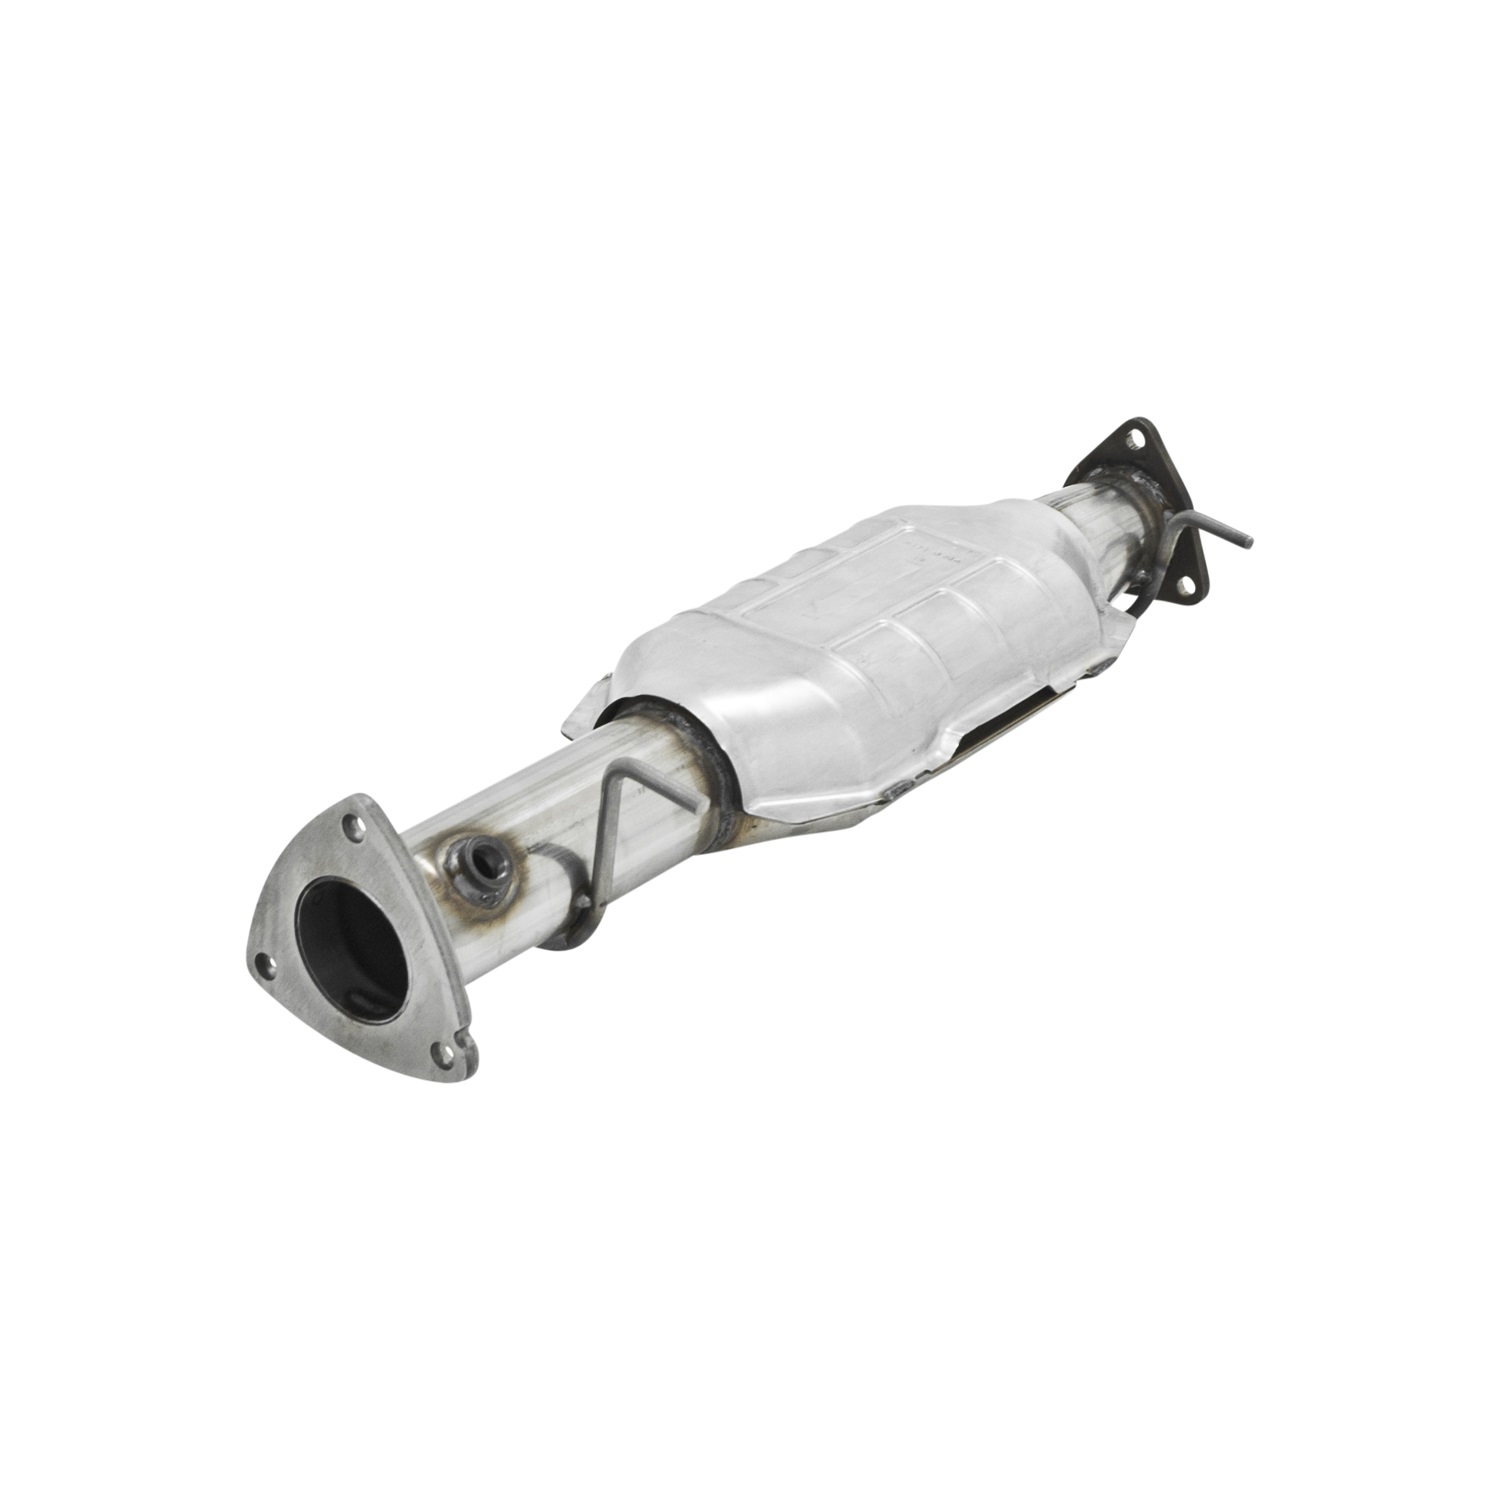 Flowmaster Flowmaster 2010027 Direct Fit Catalytic Converter Fits 98-99 S10 Pickup Sonoma